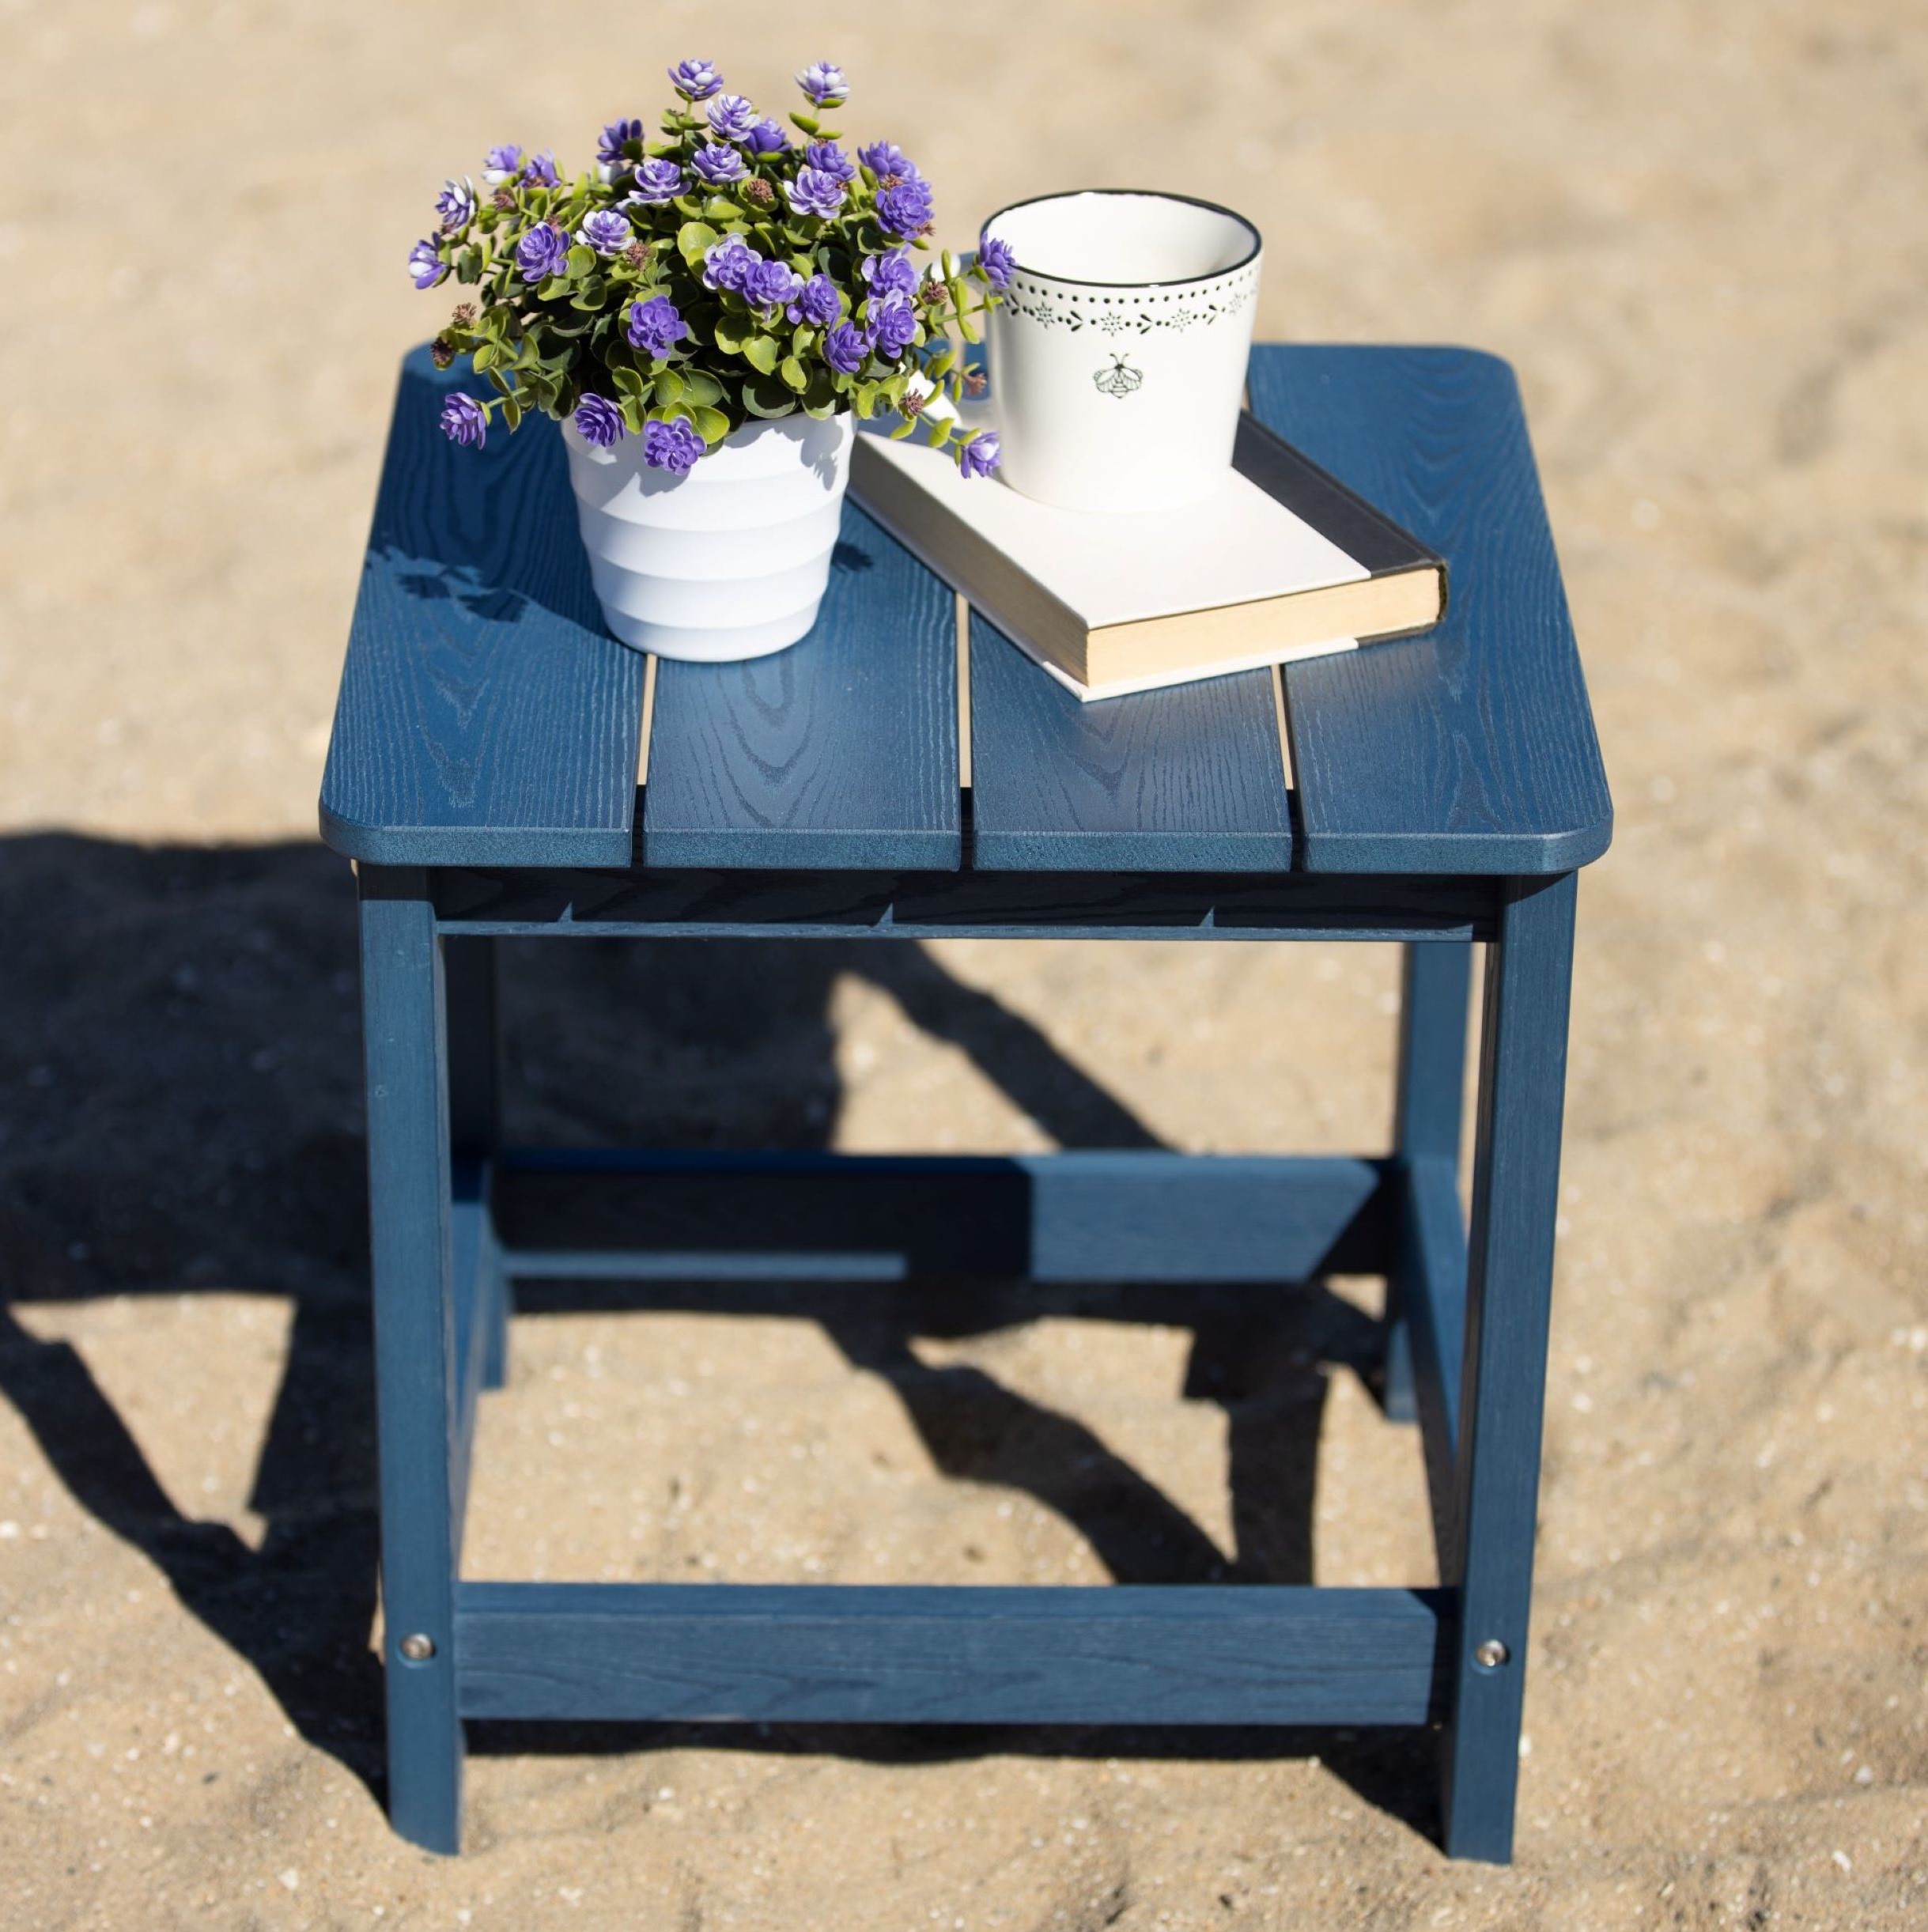 All Weather Indoor-Outdoor Side Table, Navy - image 2 of 7